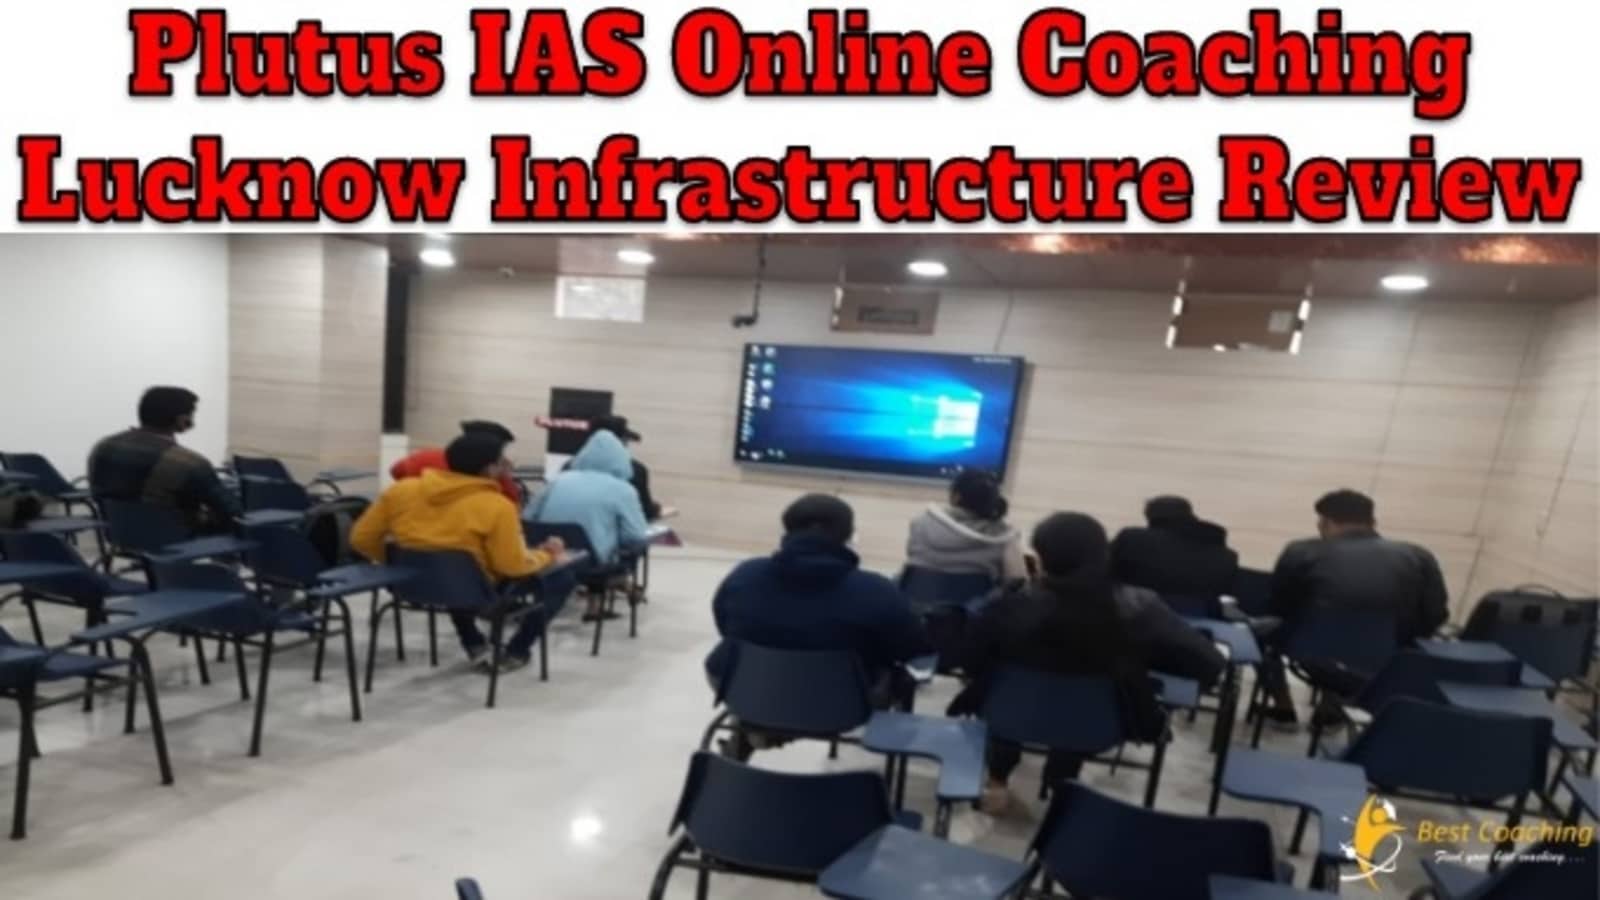 Plutus IAS Online Coaching Lucknow Infrastructure Review